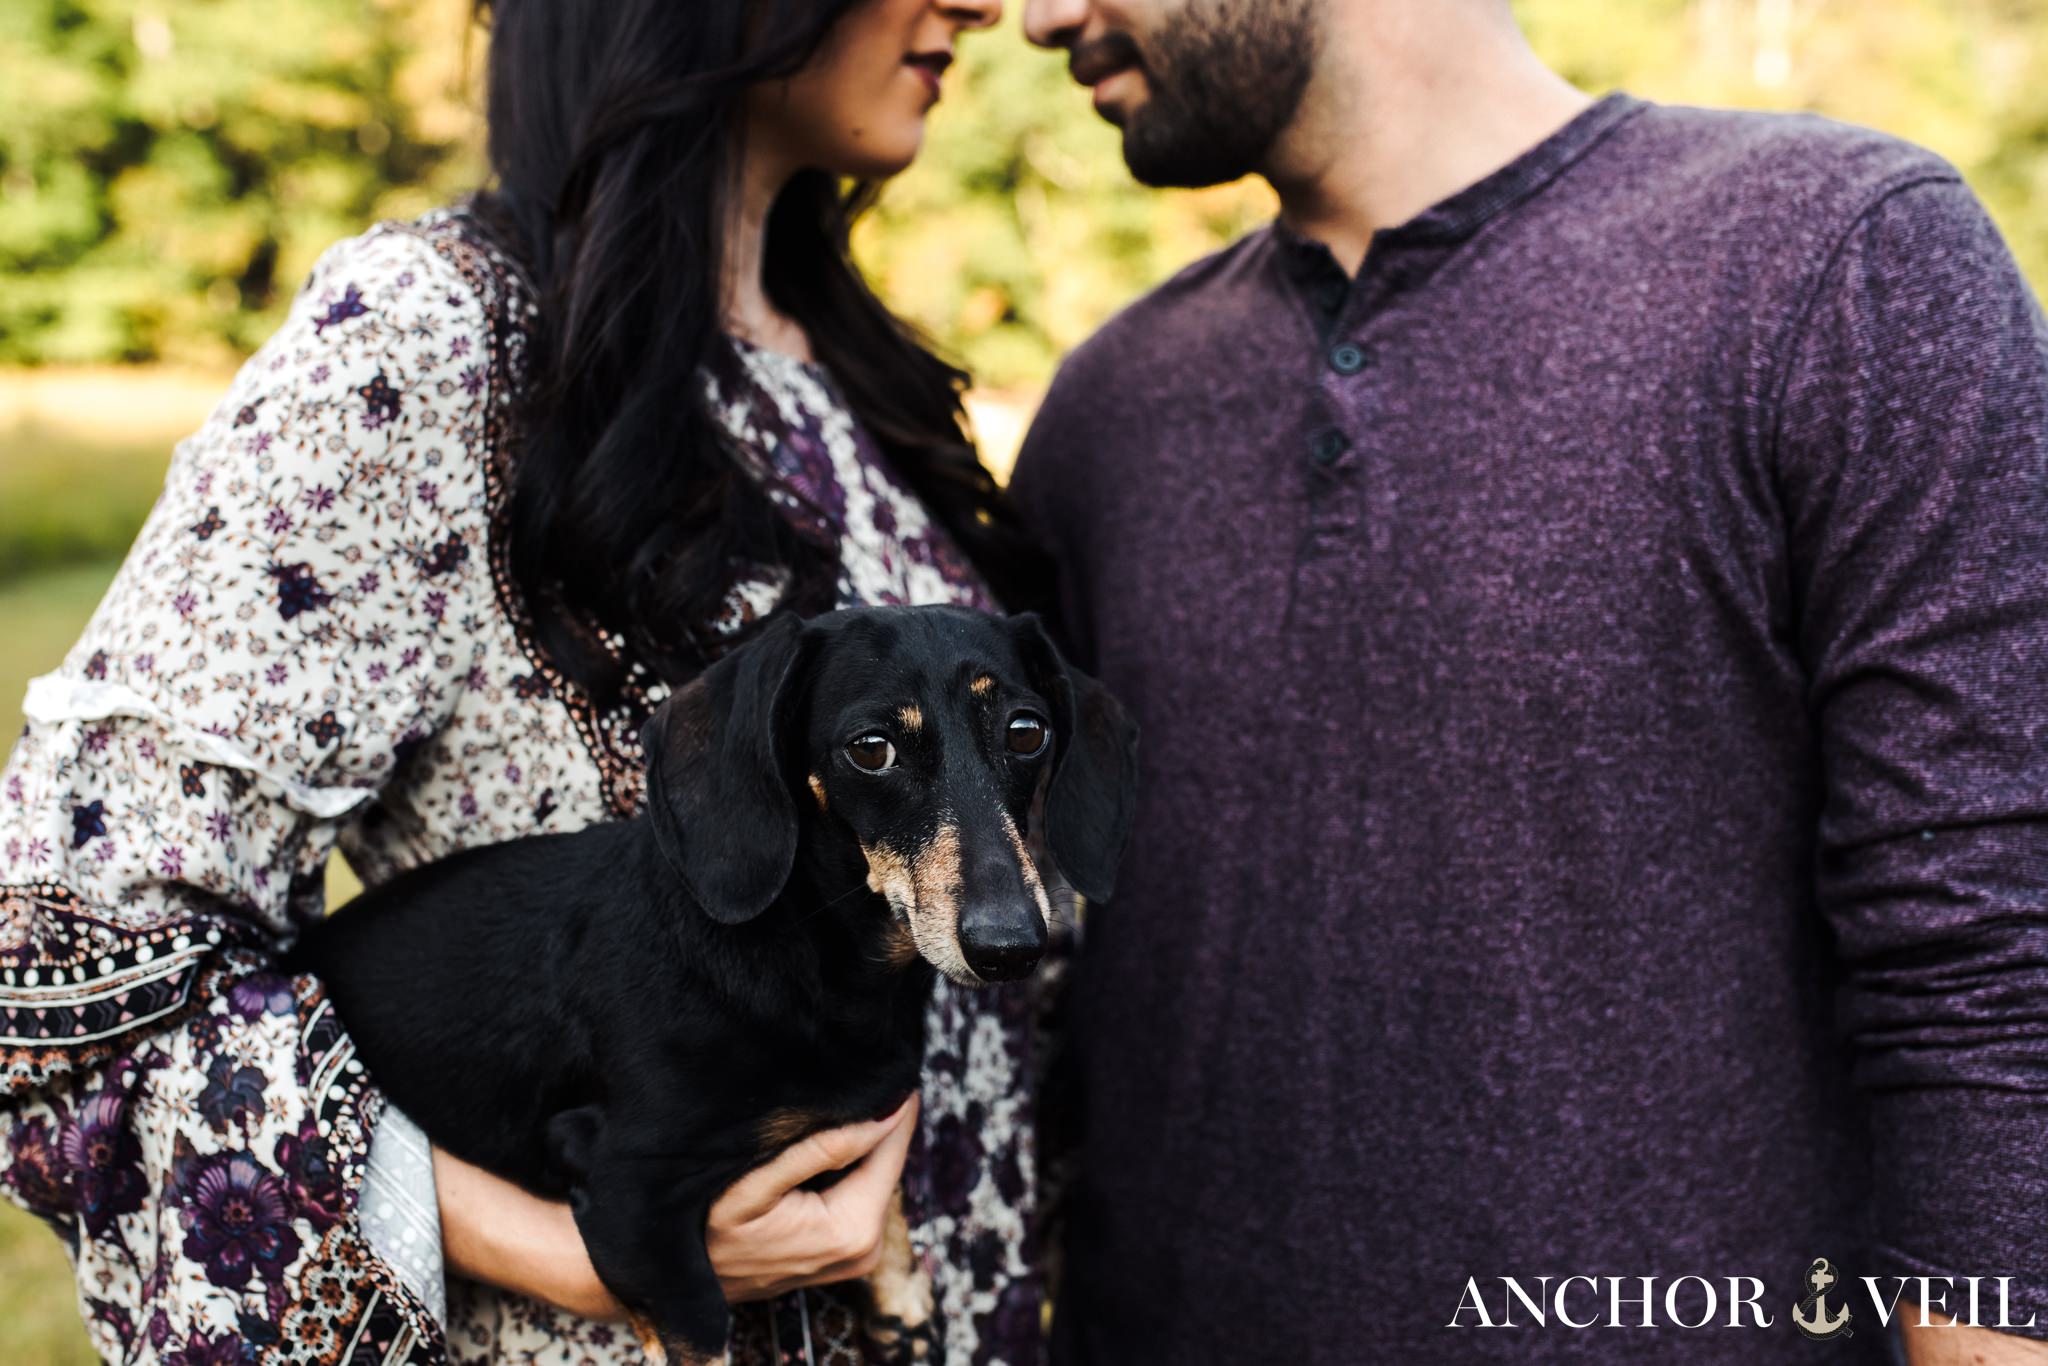 Getting Close with the Dog during their Stone Mountain Engagement Session